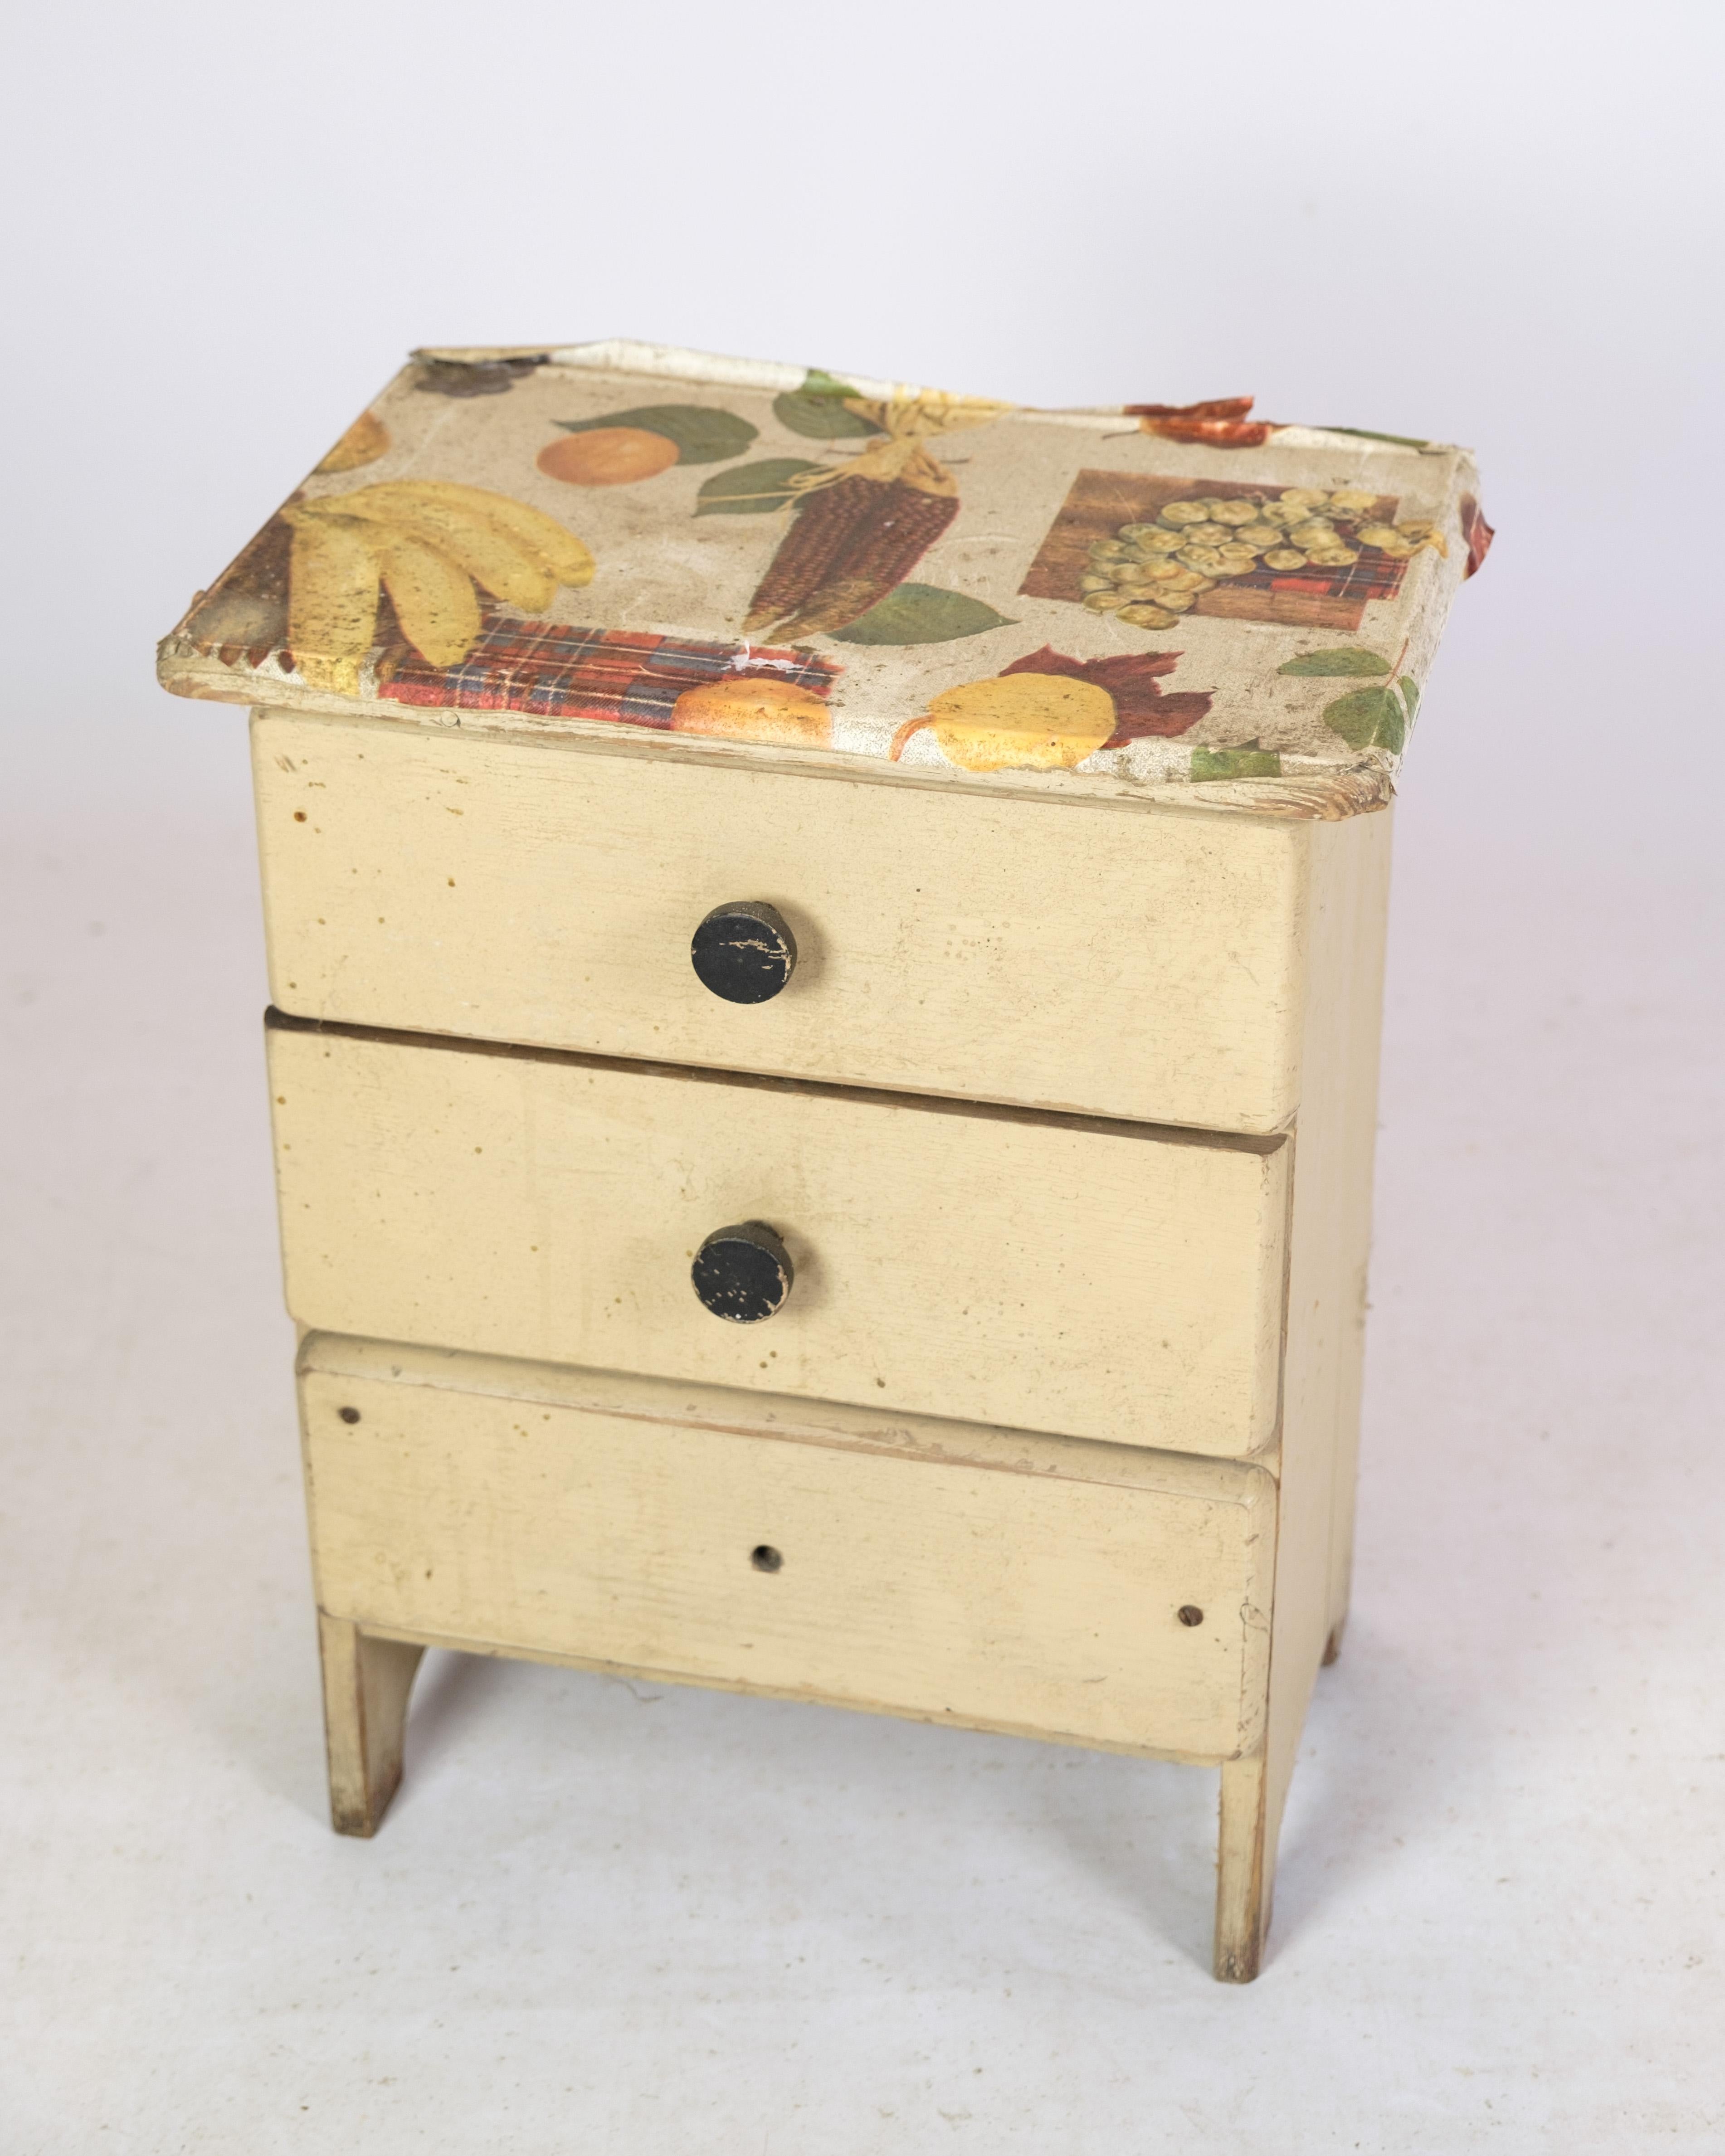 Small children's chest of drawers in painted wood from around the 1890s. We can possibly repair if interested
Dimensions in cm: H:50.5 W:39 D:25